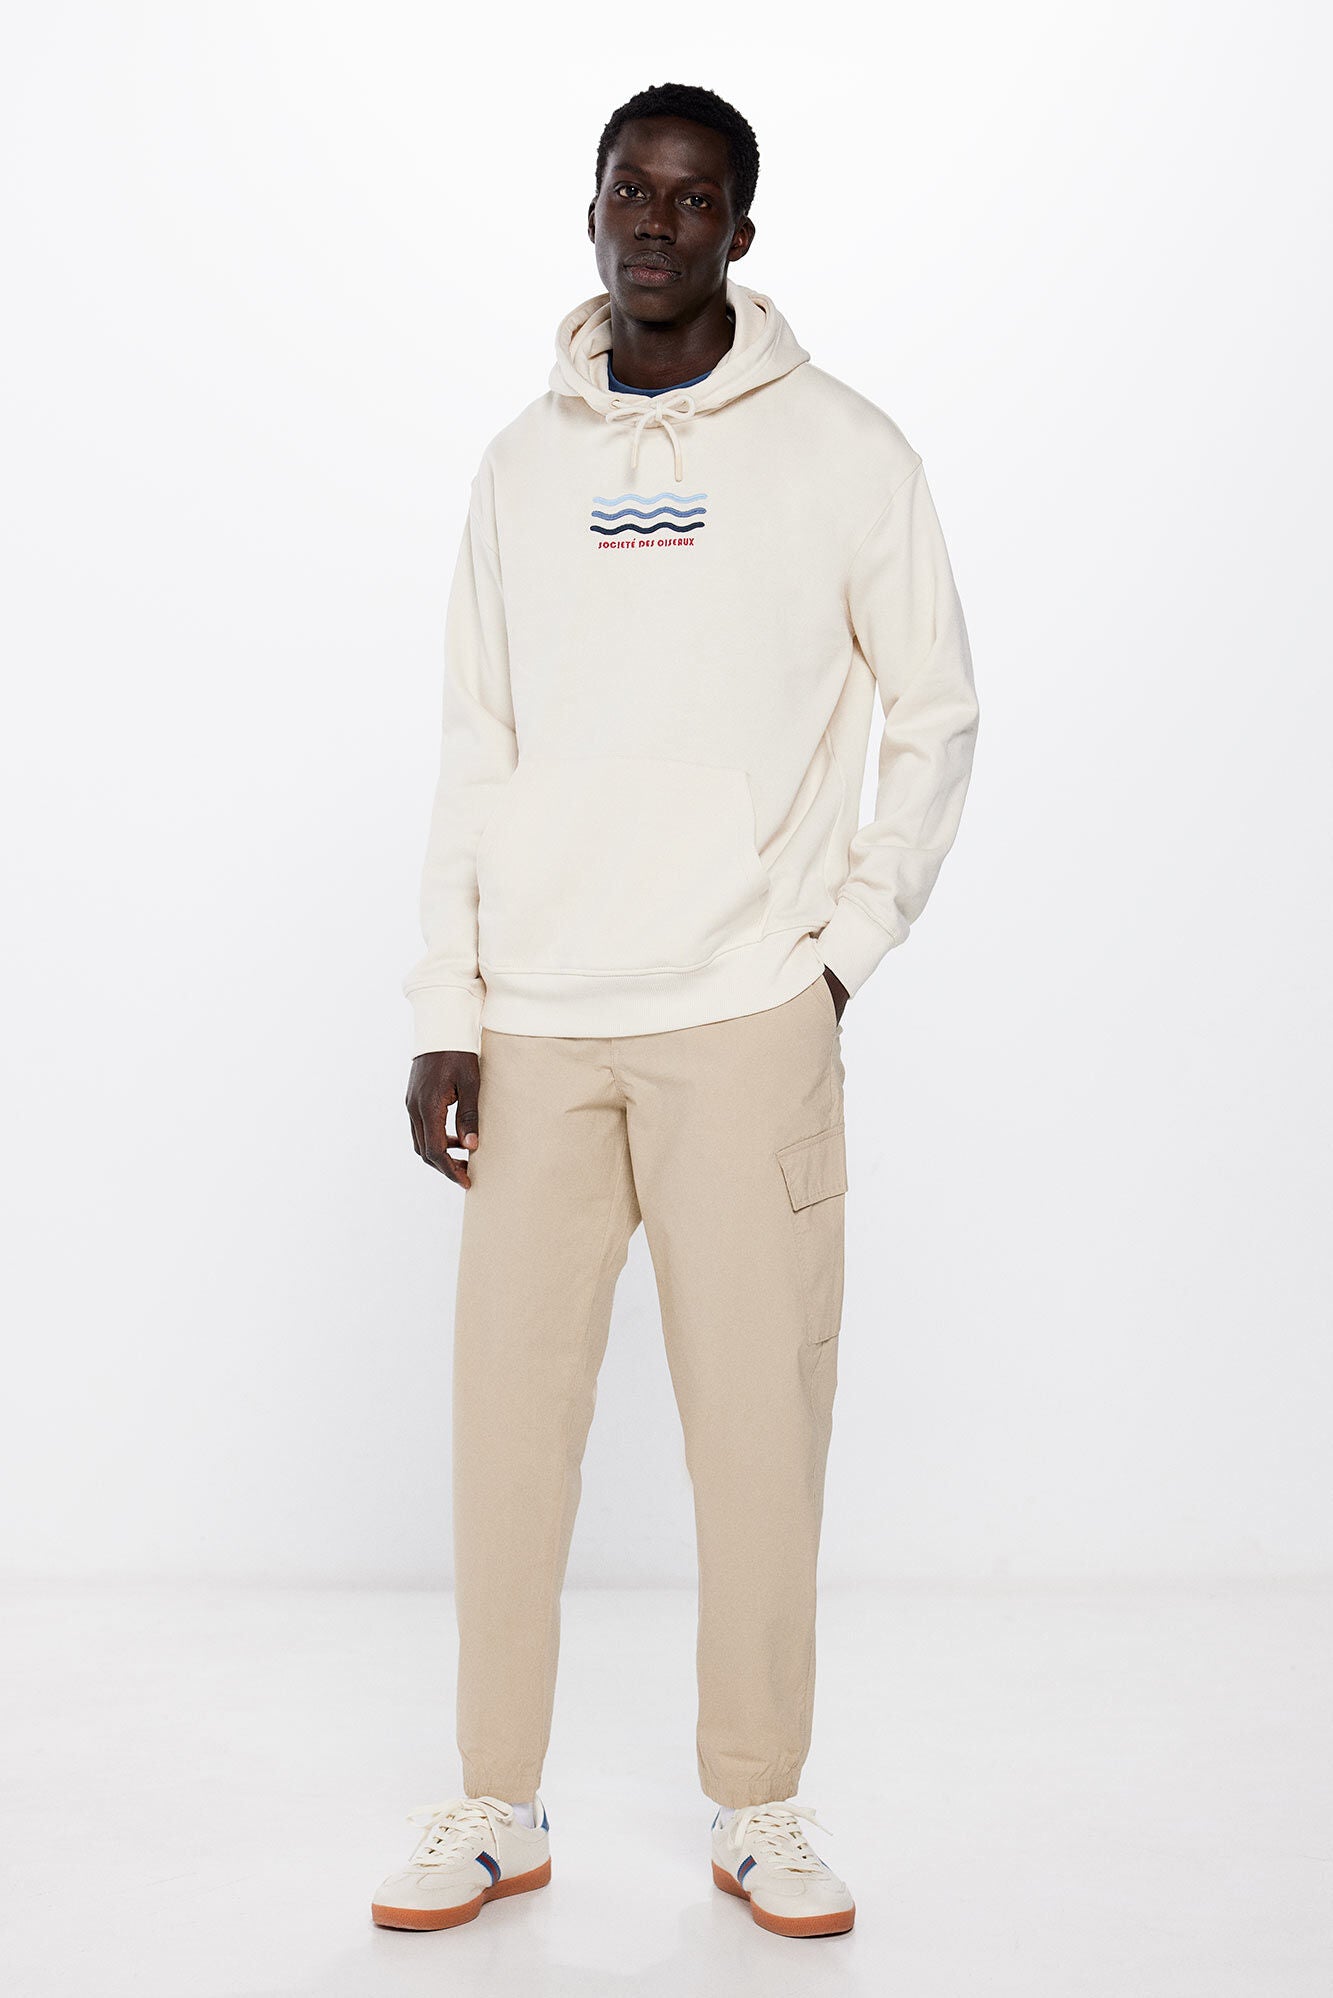 Springfield Wave Back Hoodie - White 1 Shaws Department Stores